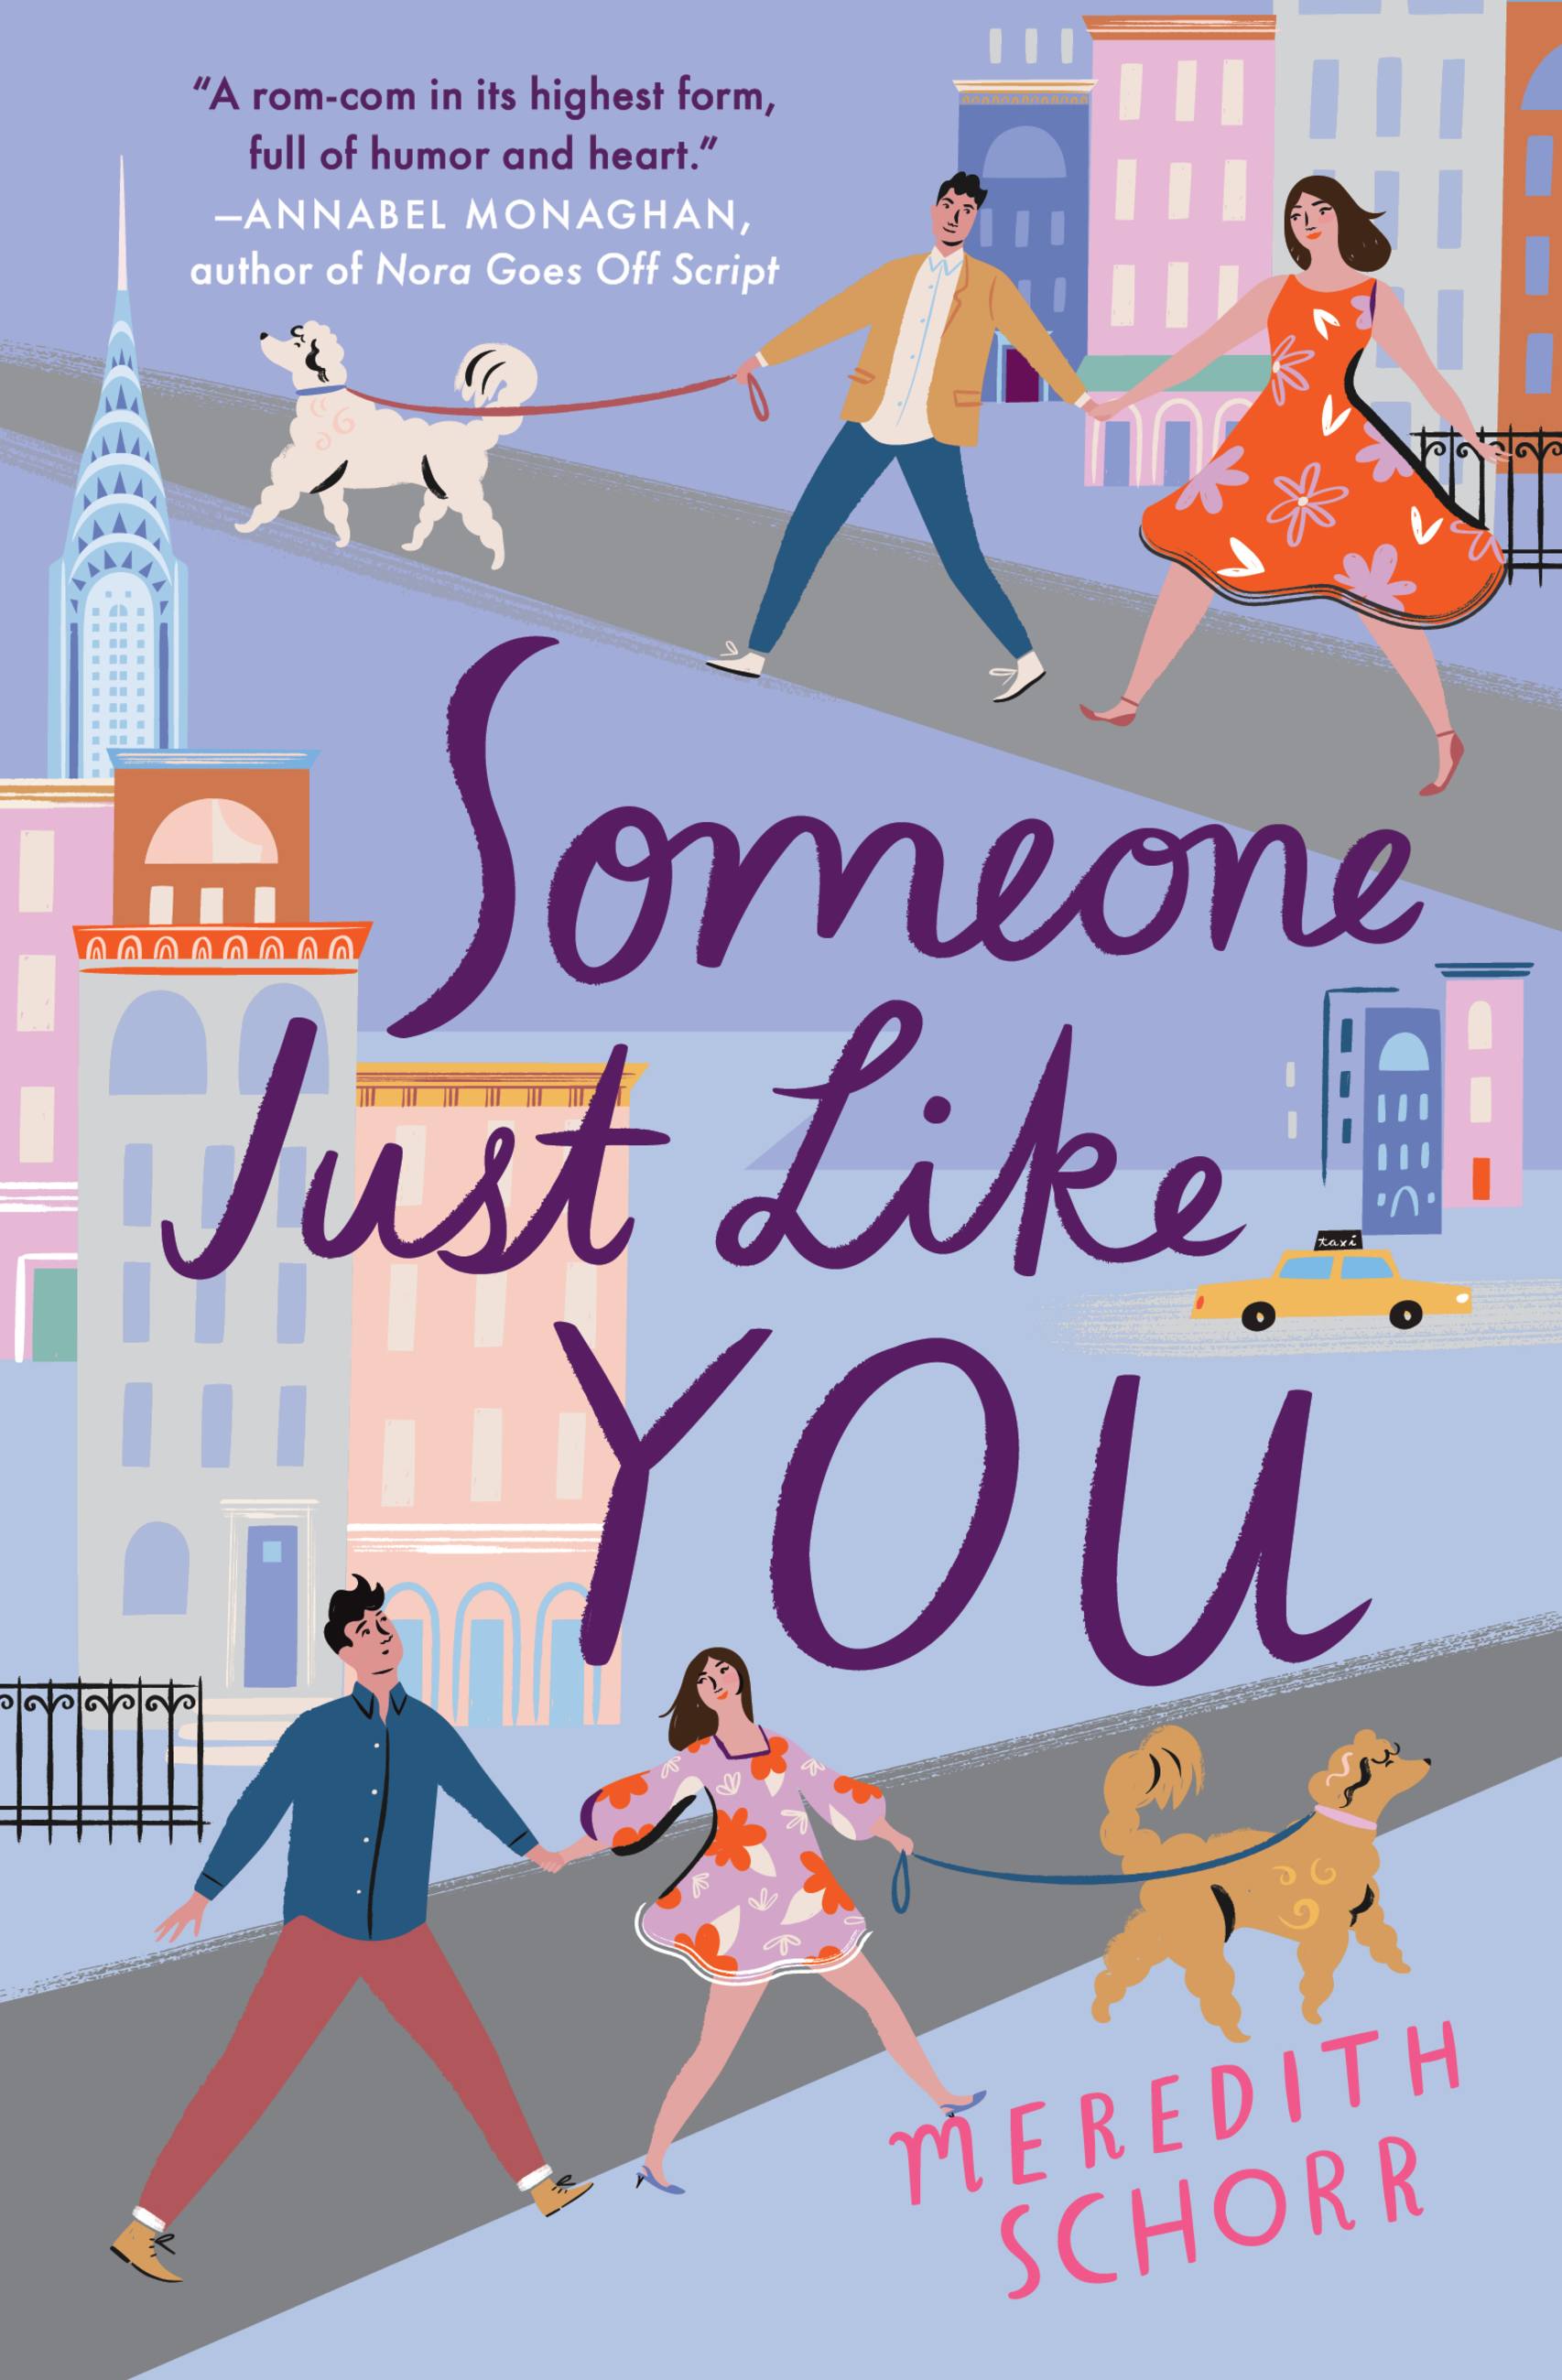 by　You　Schorr　Like　Someone　Group　Just　Meredith　Hachette　Book